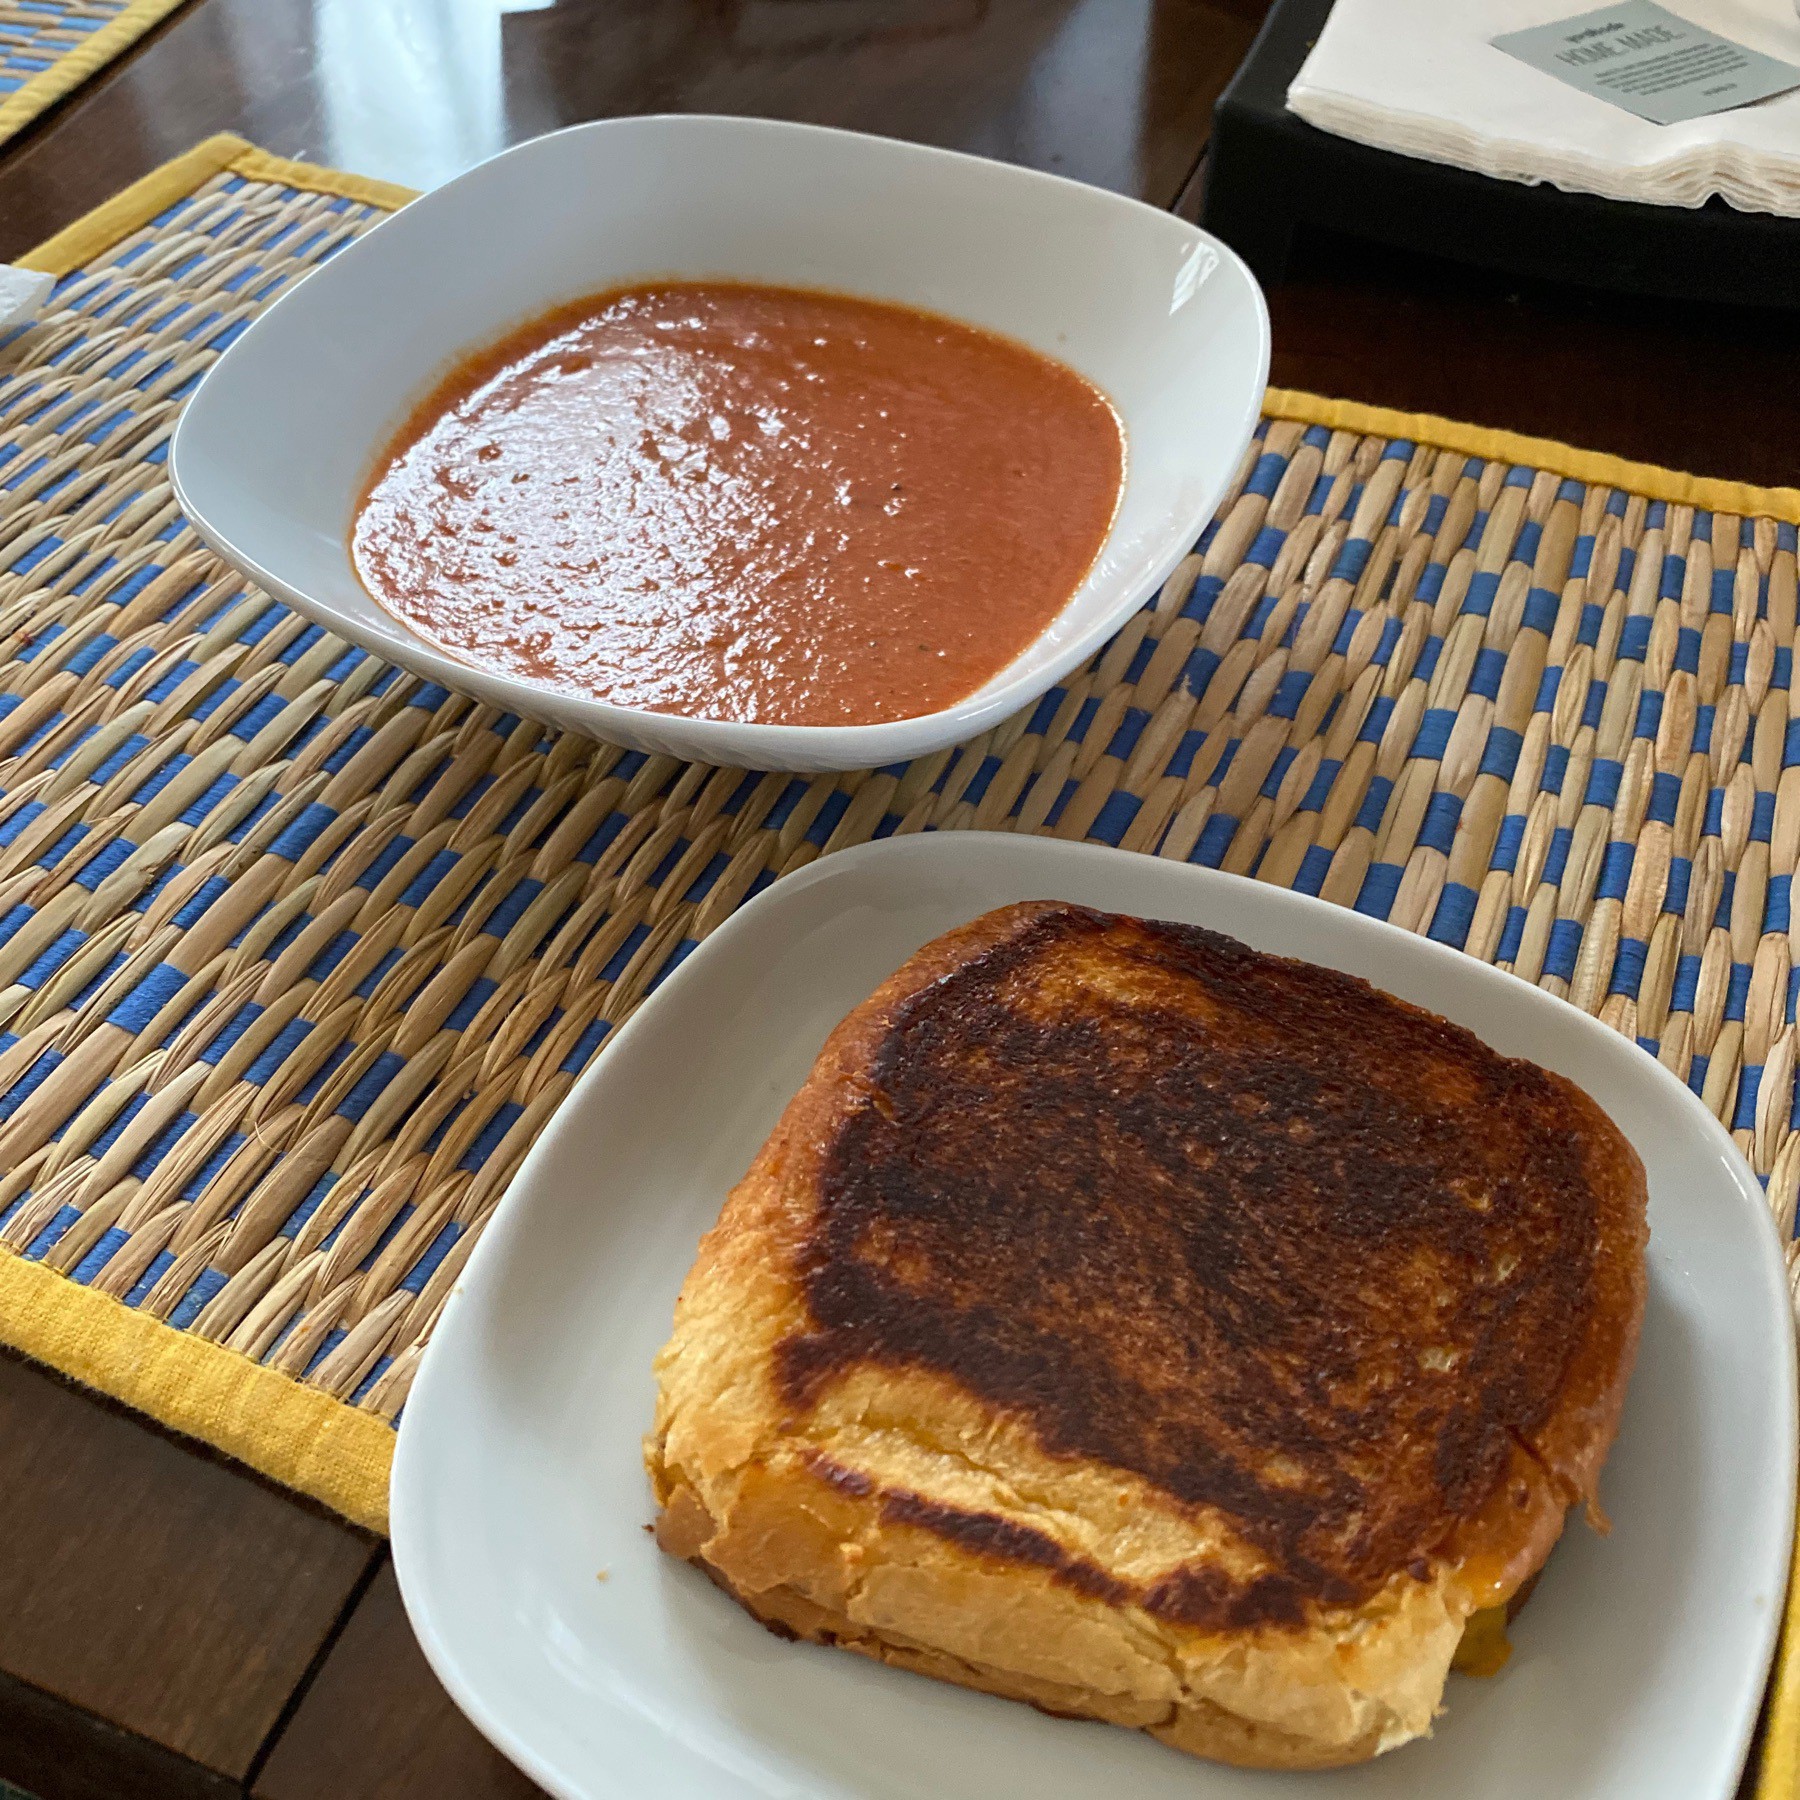 Grilled cheese sandwich and bowl of tomato soup.